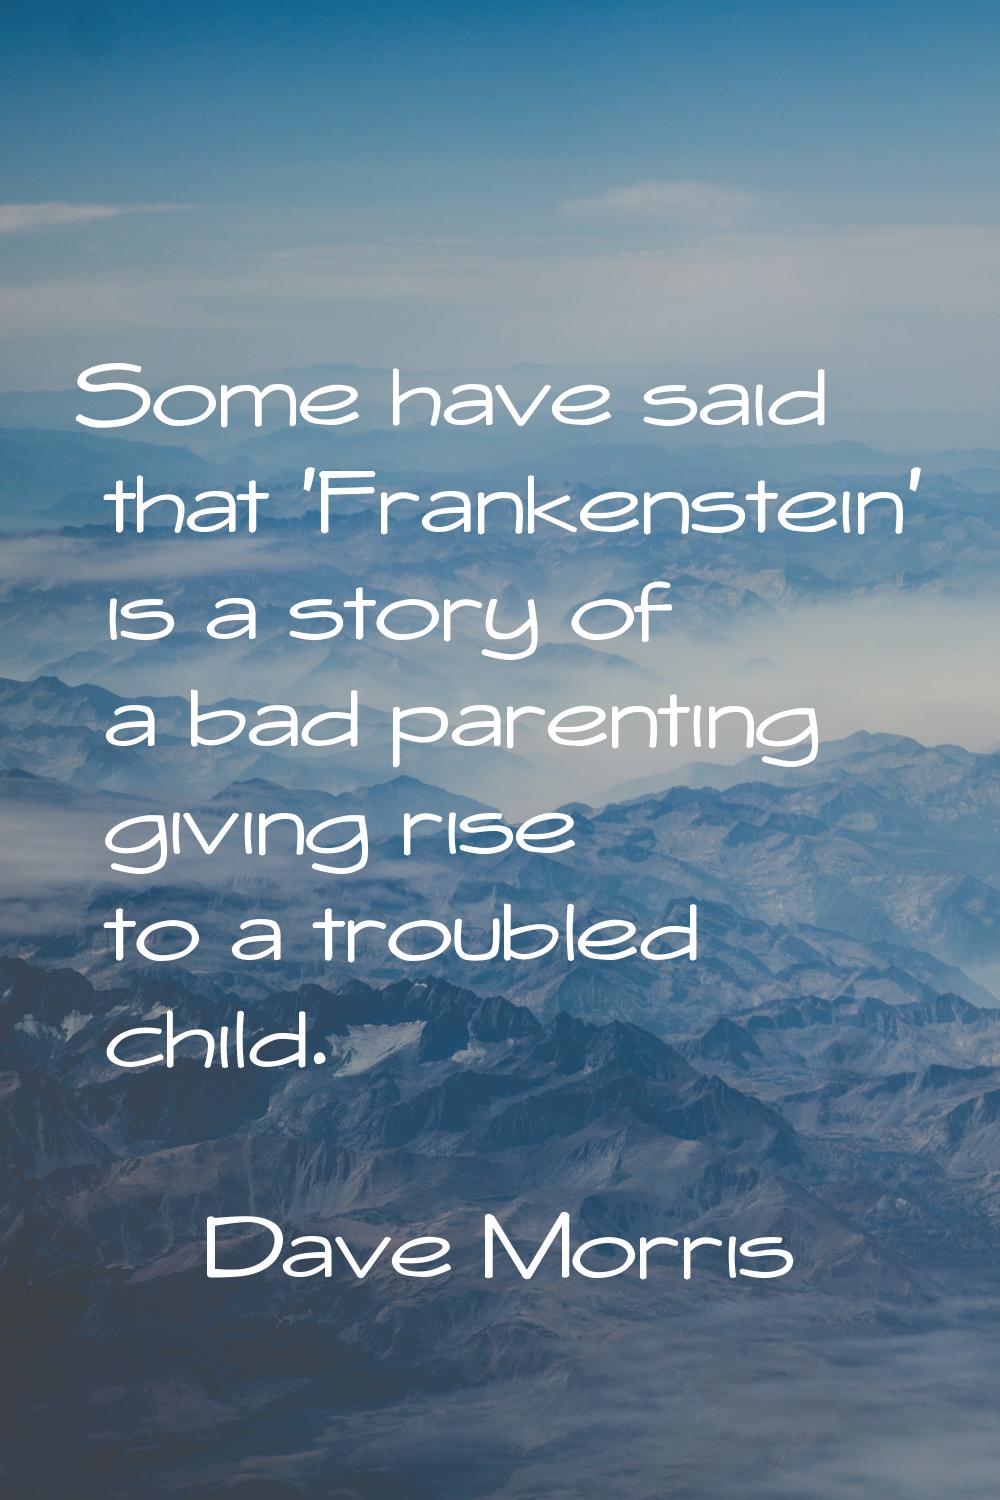 Some have said that 'Frankenstein' is a story of a bad parenting giving rise to a troubled child.